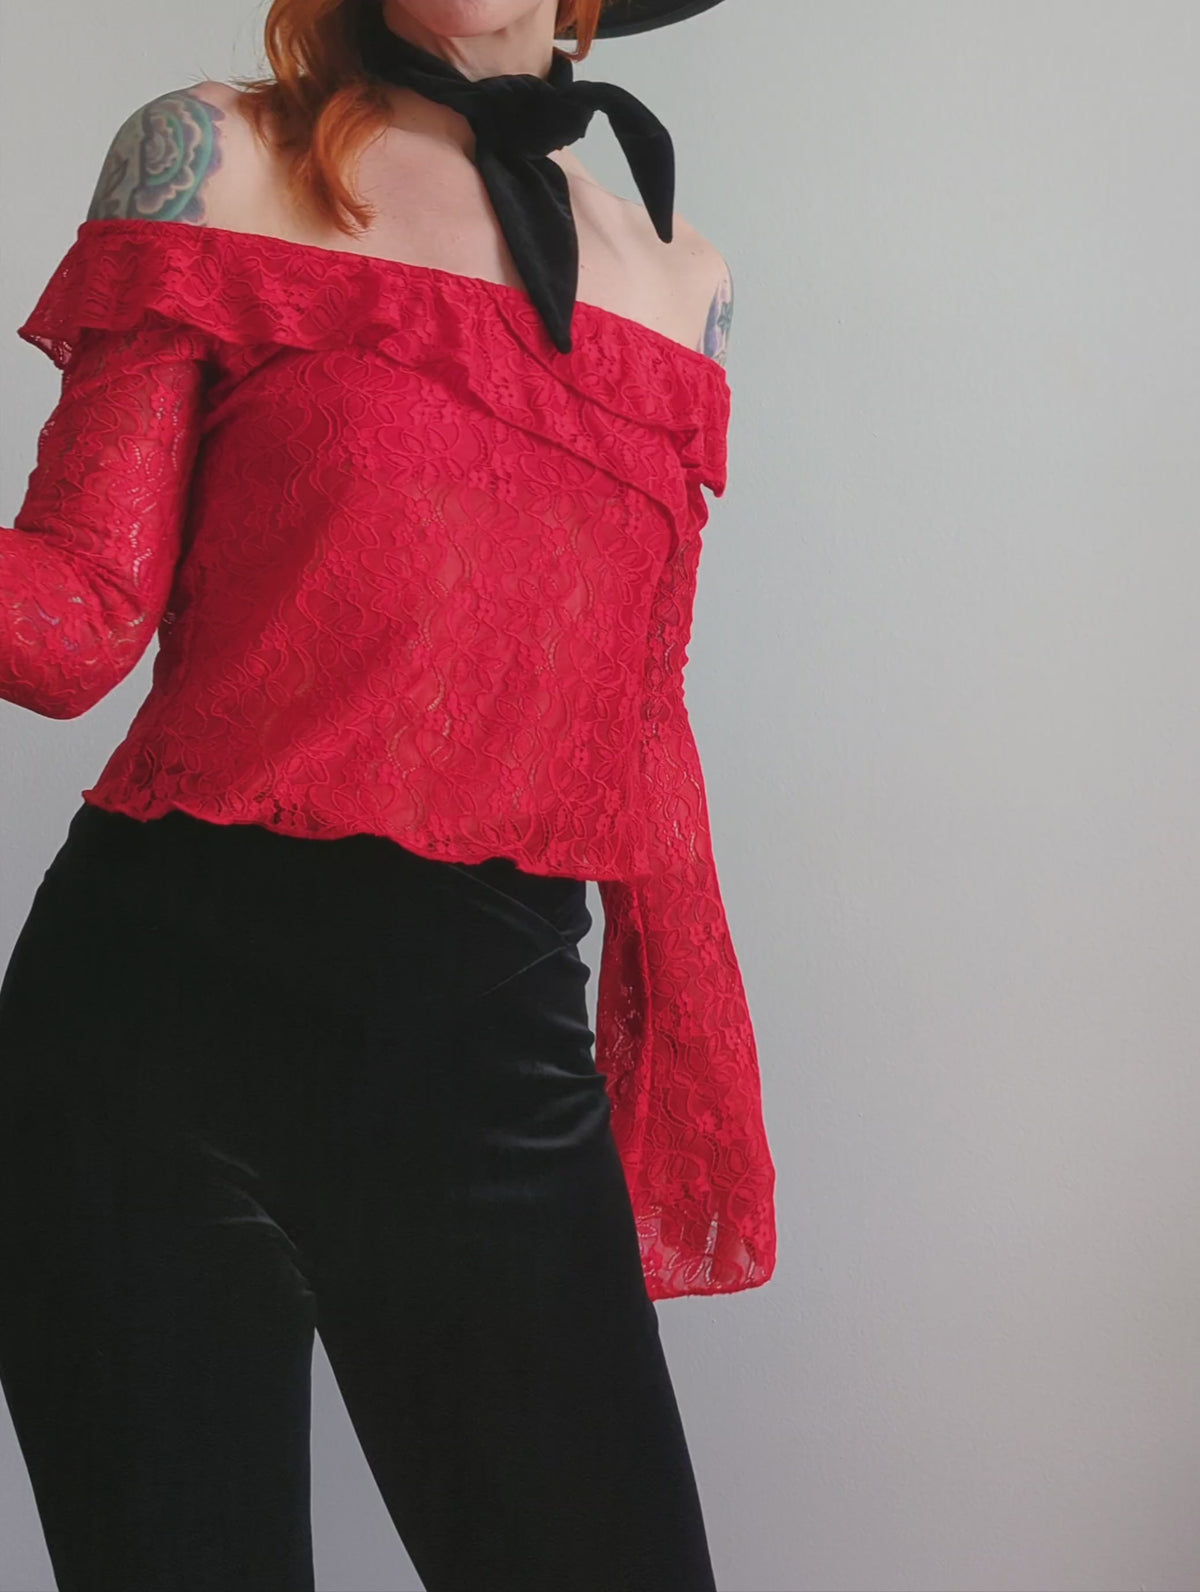 Romantic 90s inspired red lace off shoulder bardot top with bell sleeves by Motel Rocks